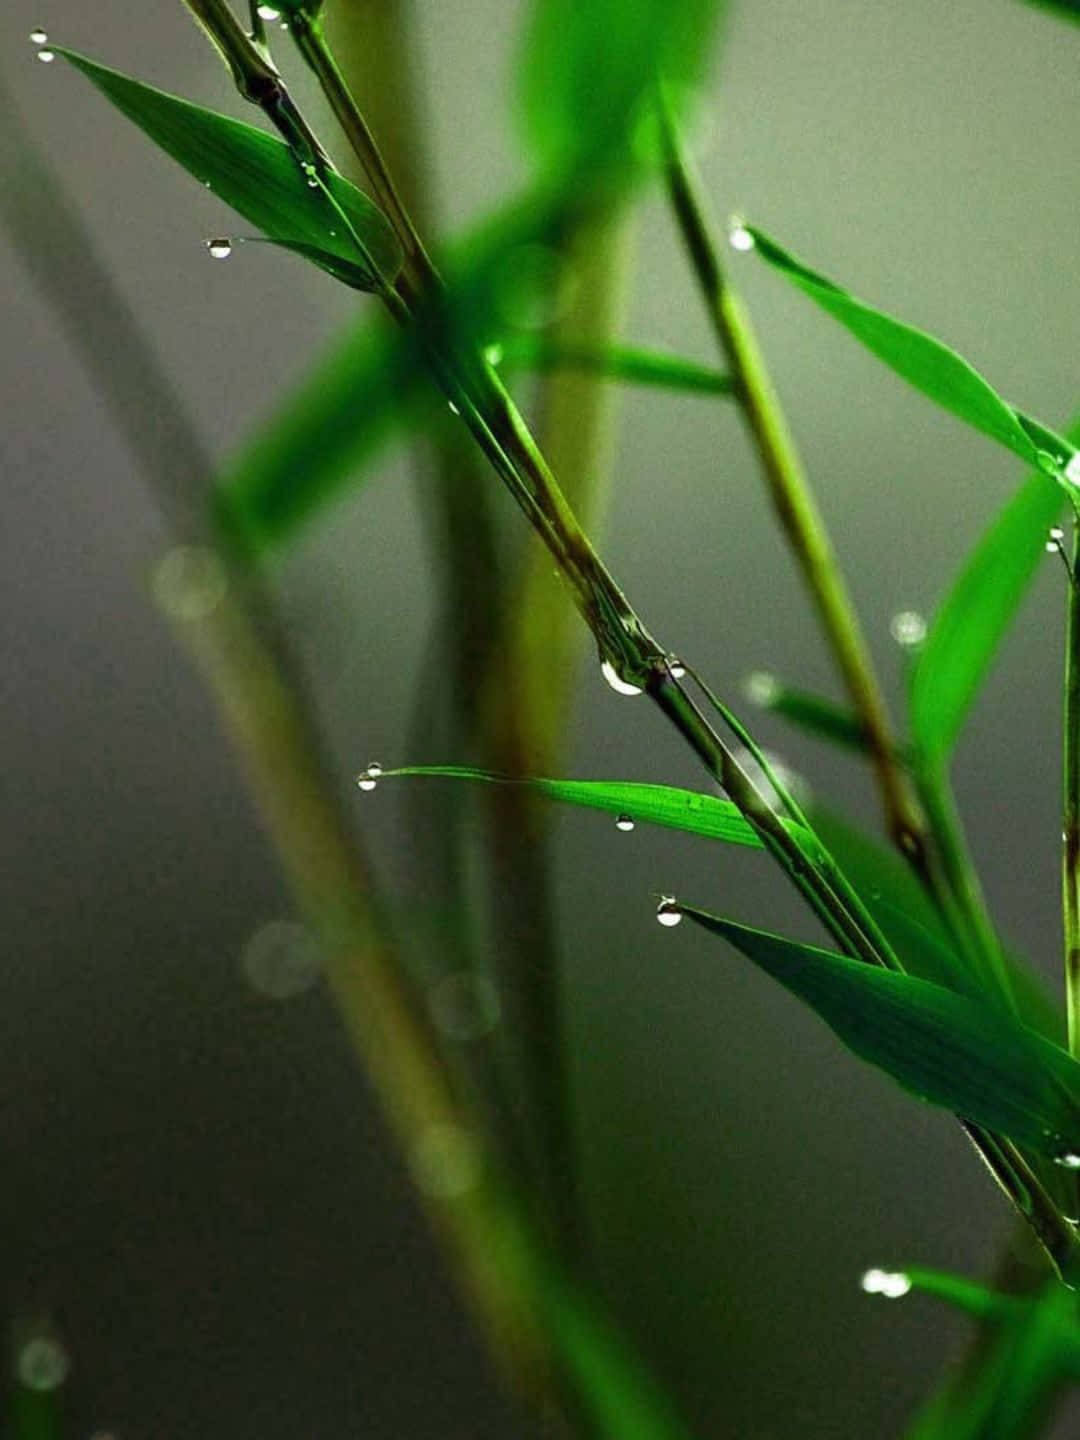 1440p Bamboo Background With Wet Moist Leaves